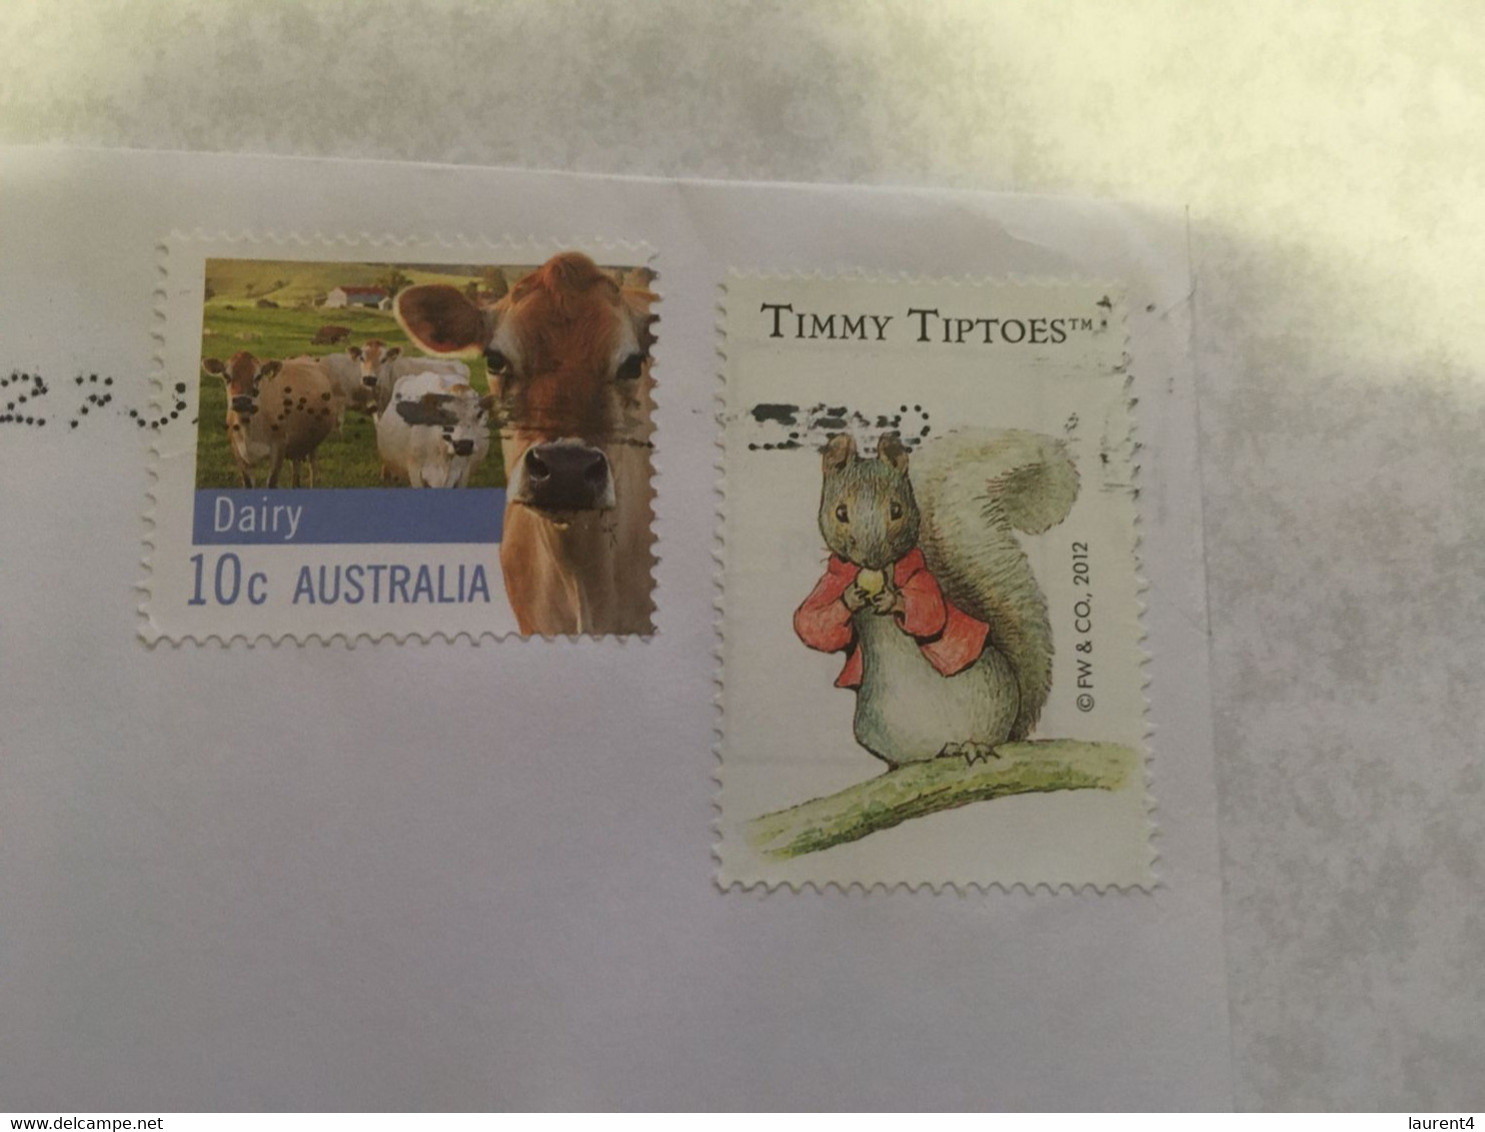 (Y 14) Australia - Postage Label ILLEGALLY Used As Postage (with Extra 10 Cent Stamp) - Variedades Y Curiosidades